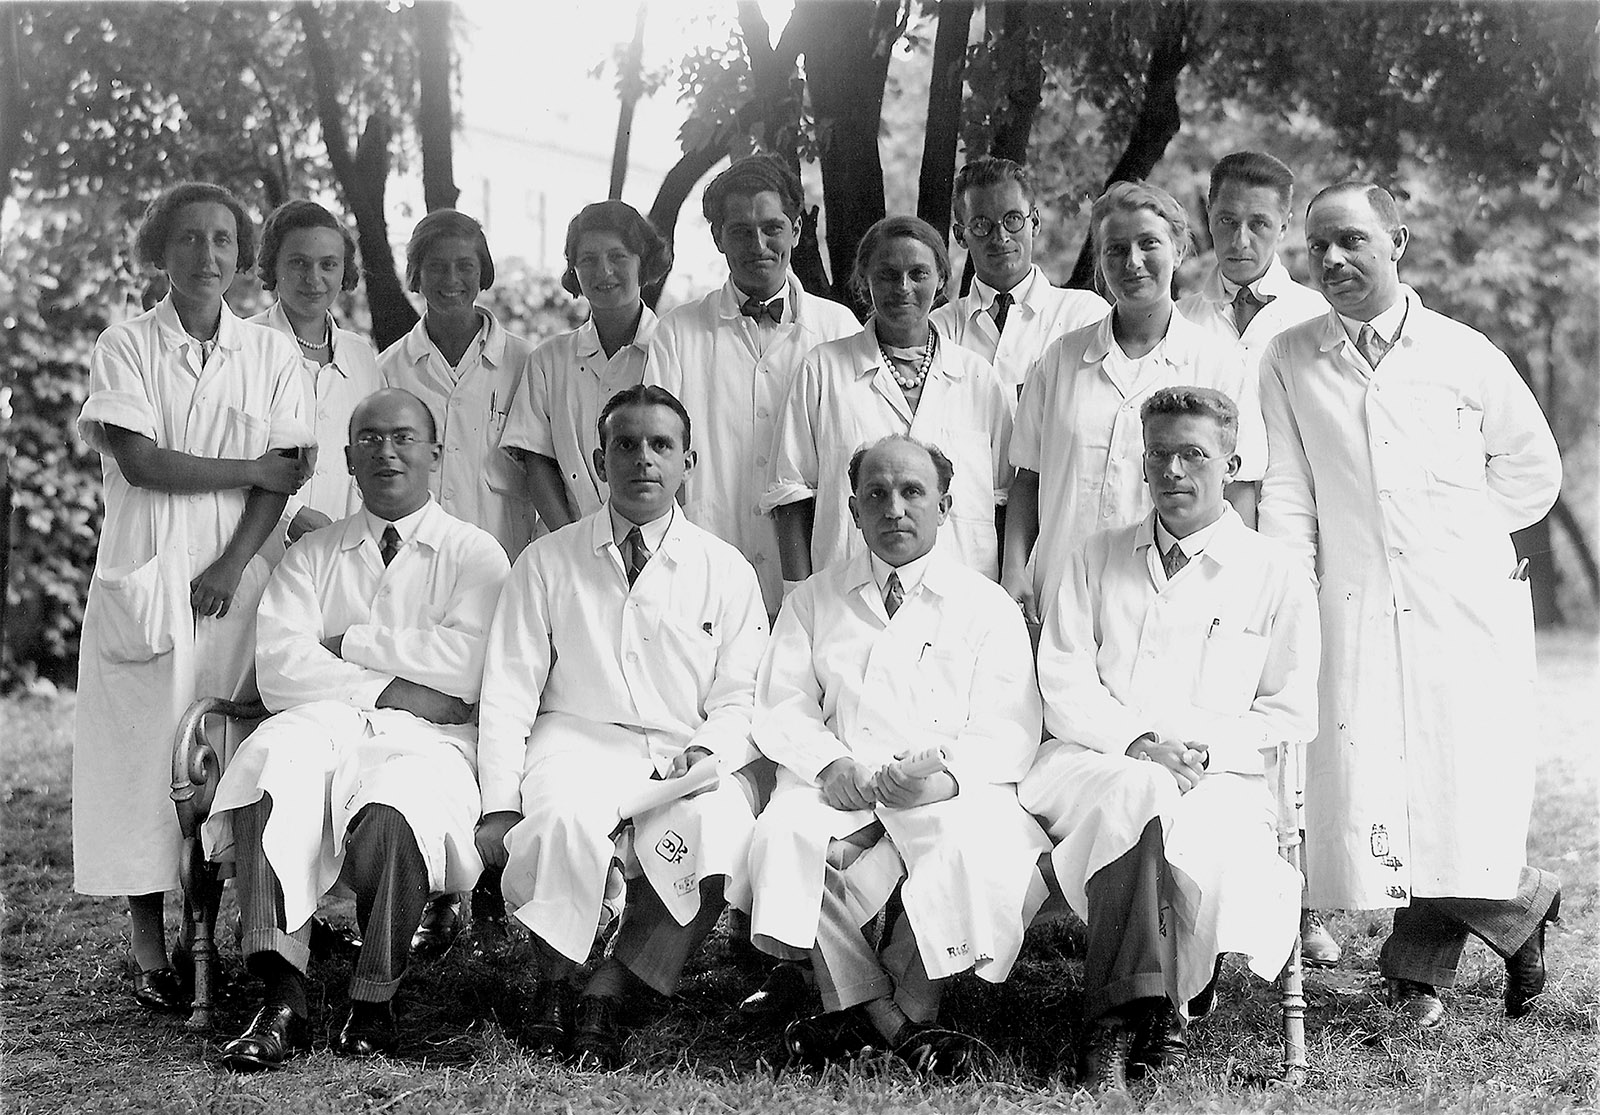 Hans Asperger, bottom right, with the staff of the Vienna Children’s Hospital, 1933